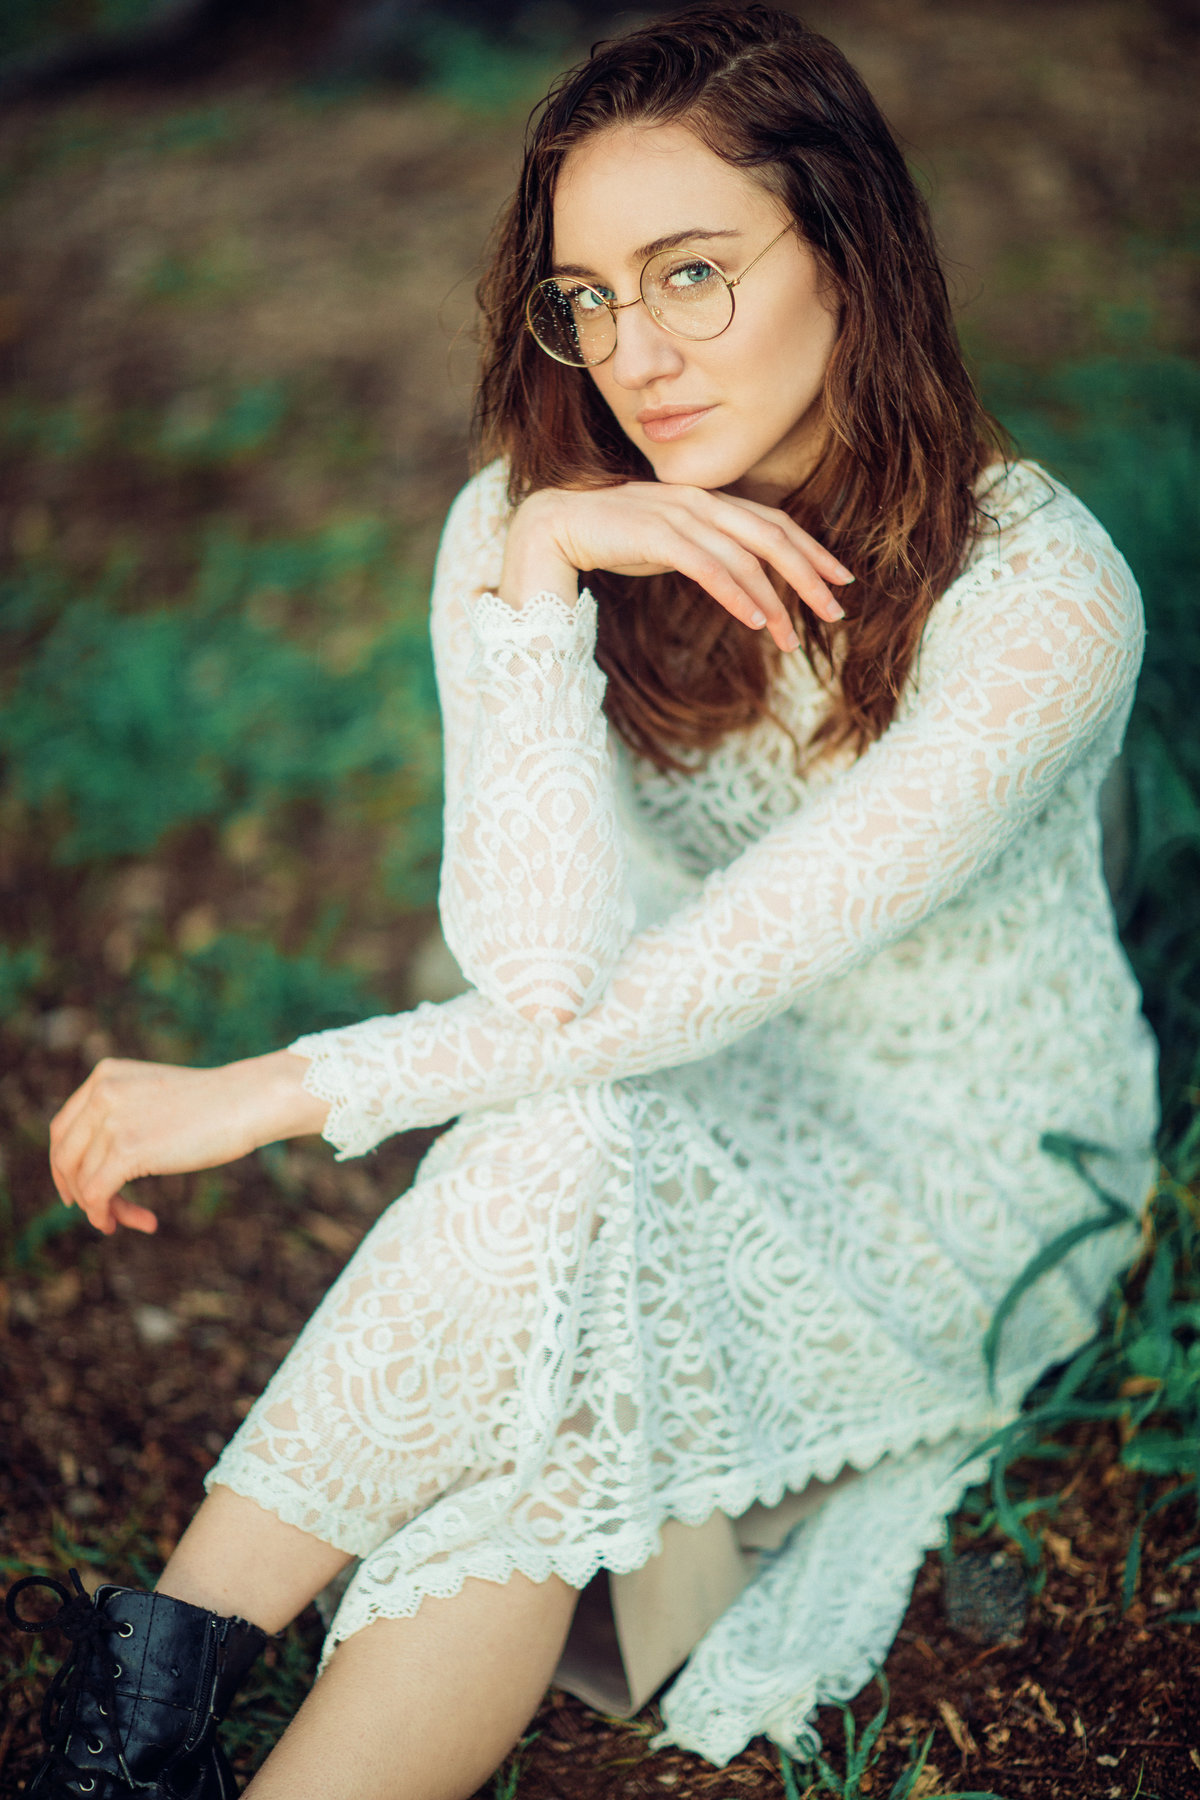 Portrait Photo Of Young Woman In White Dress With Eye Glasses Los Angeles